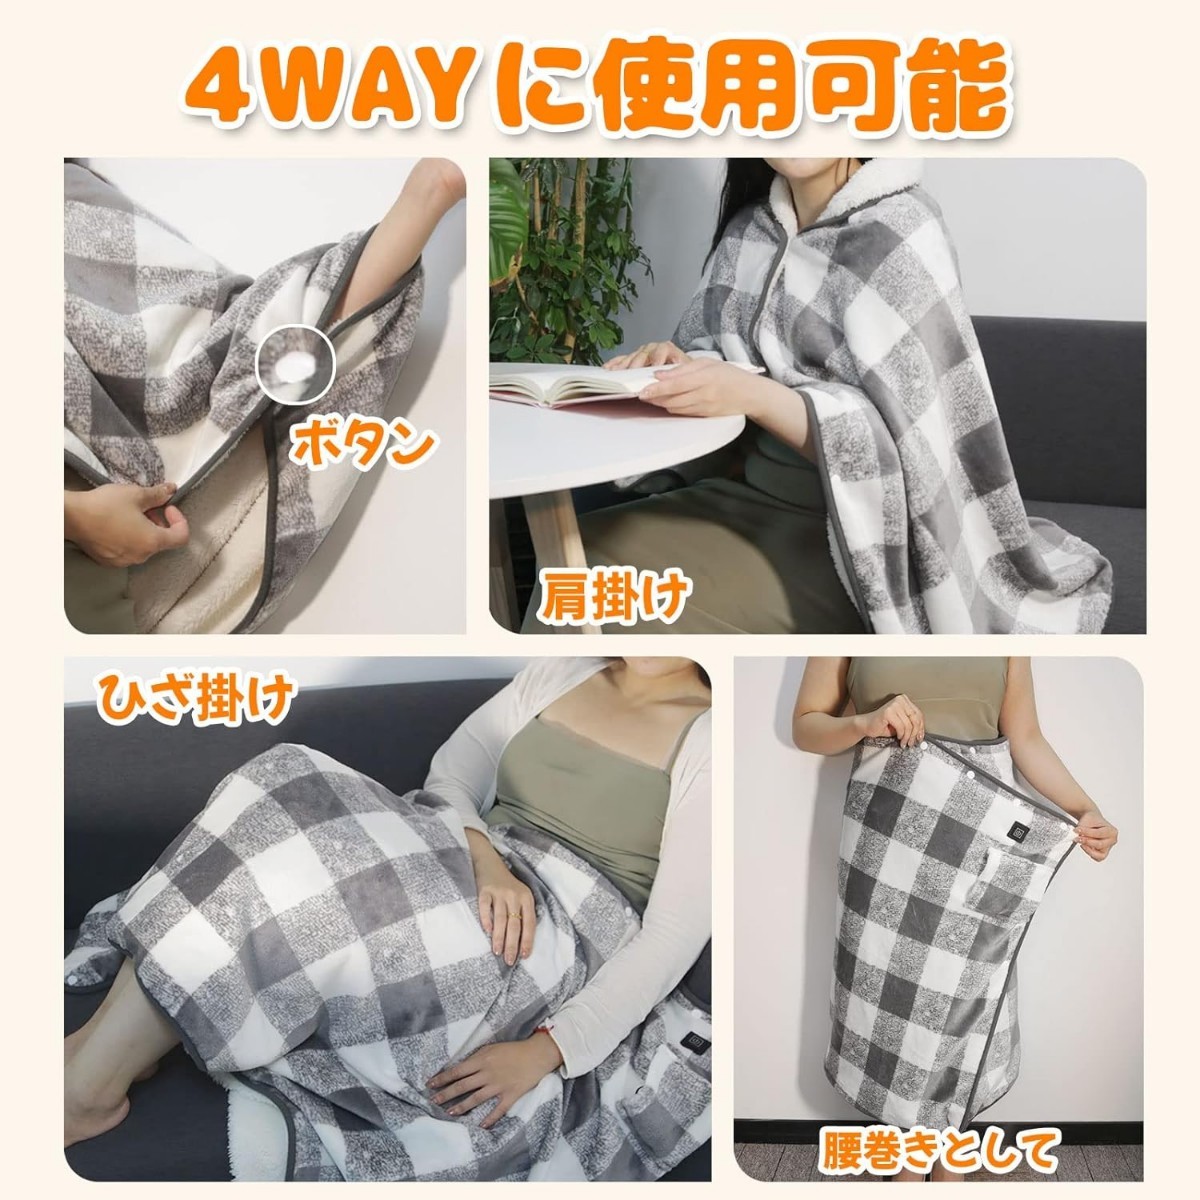  electric .. bed combined use electric blanket usb blanket 140x80cm camp lap blanket bed .. blanket ...3 -step temperature adjustment gray 